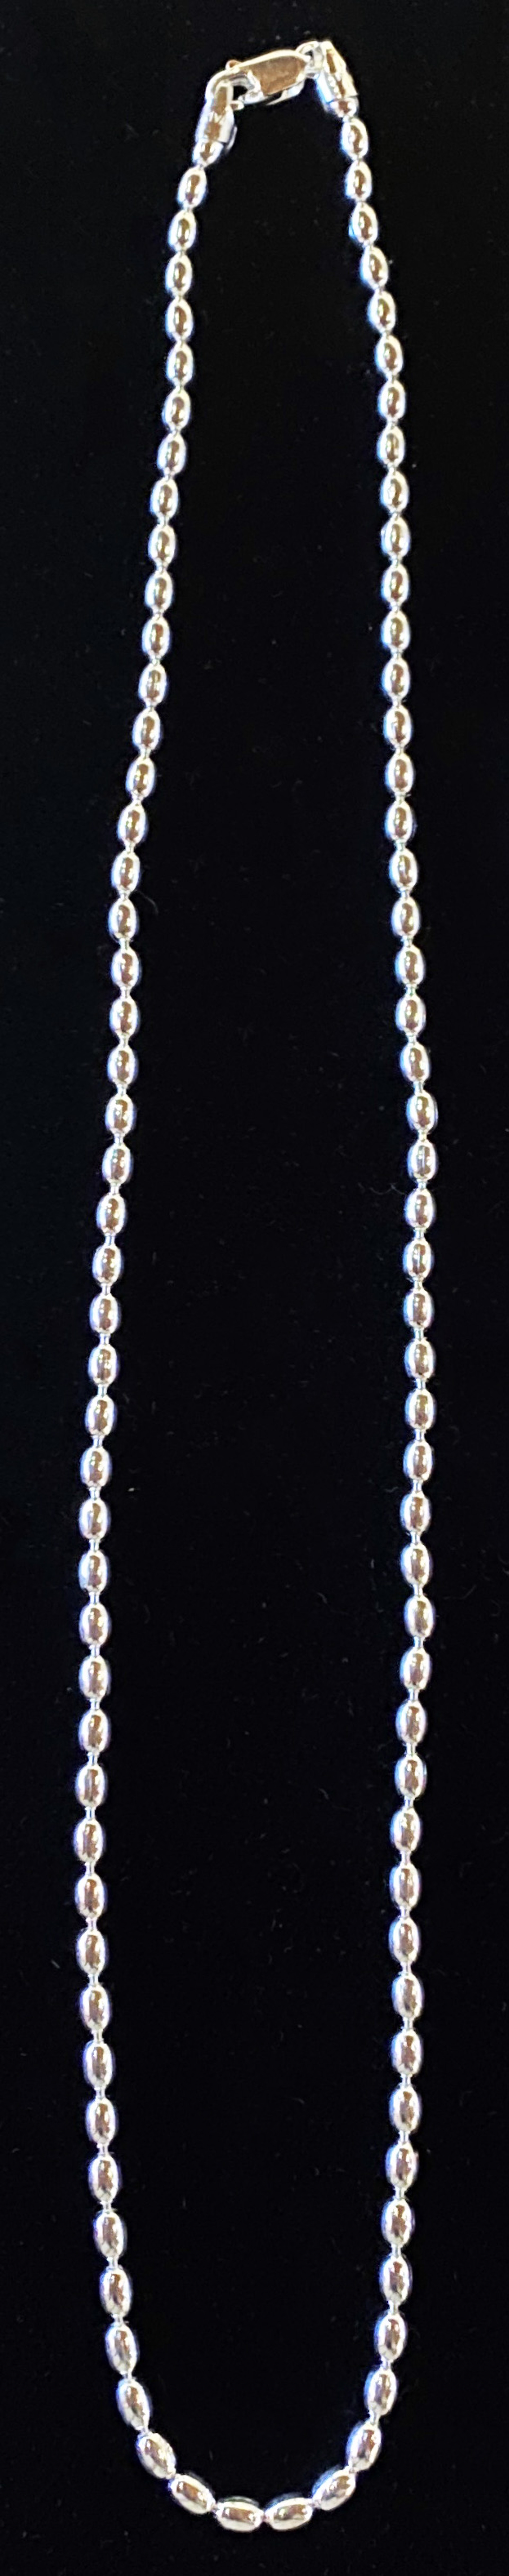 Oval Bead Silver Necklace by Artist Unknown